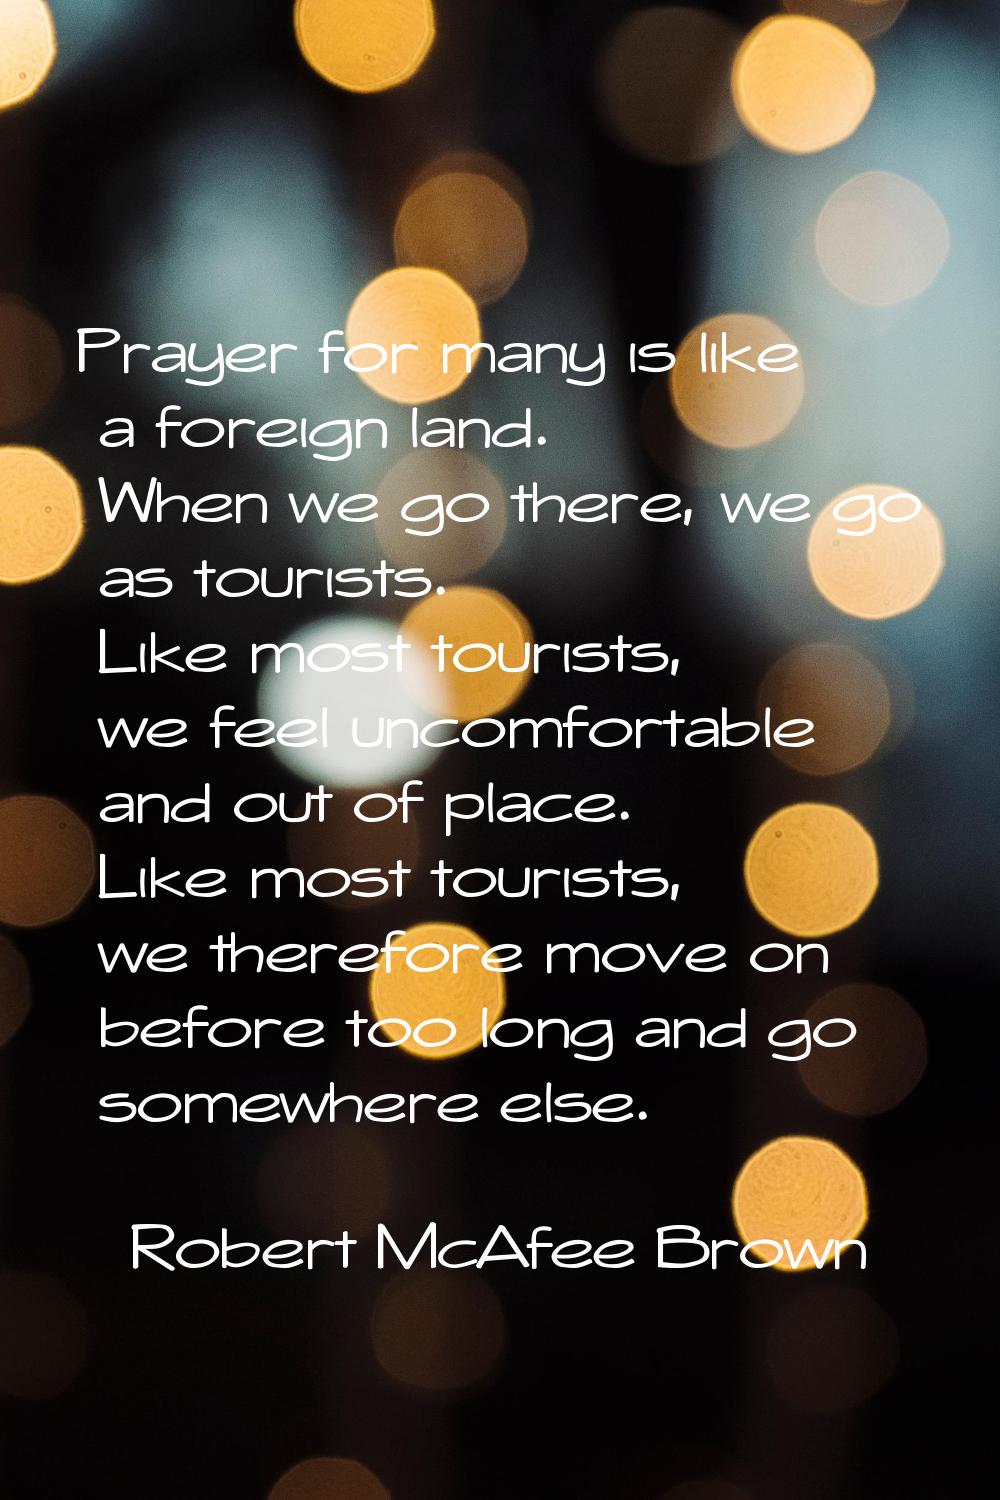 Prayer for many is like a foreign land. When we go there, we go as tourists. Like most tourists, we